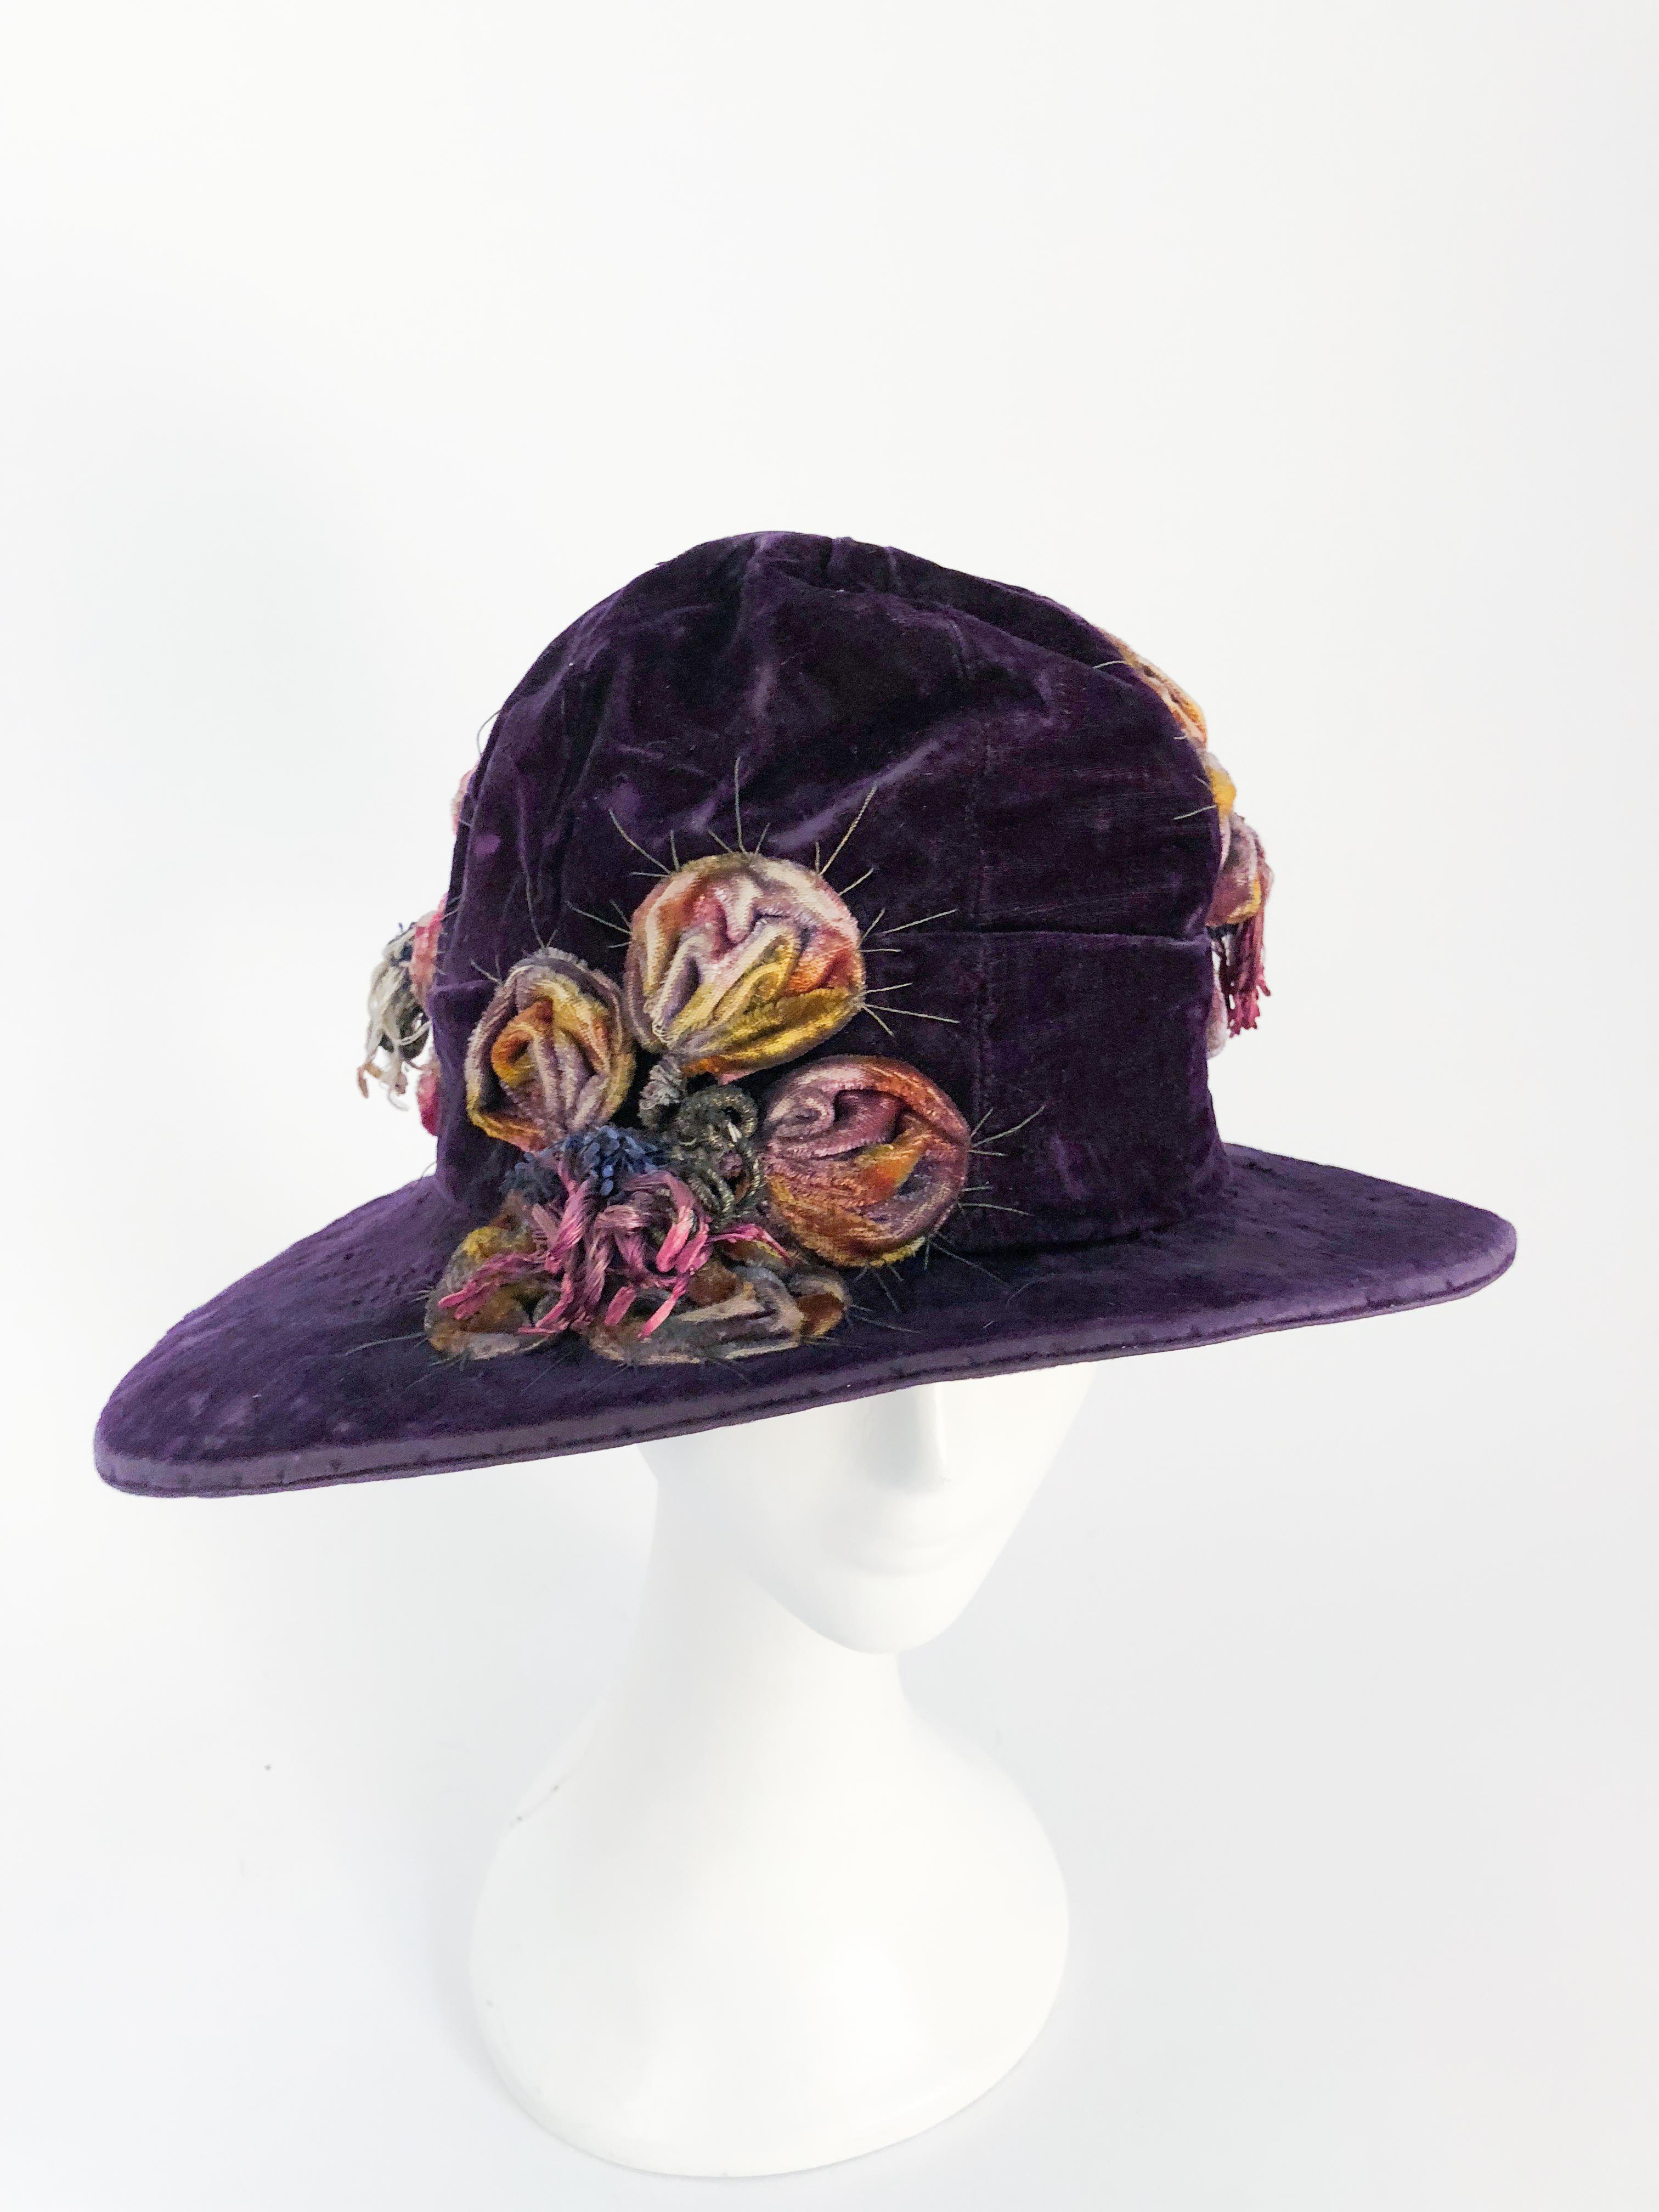 1920s Purple Velvet Cloche With Flower Accent Pieces. Very early 1920s purple velvet cloche wiht stuffed 3D multi colored flowers with brass threaded details that come out of the three flowers